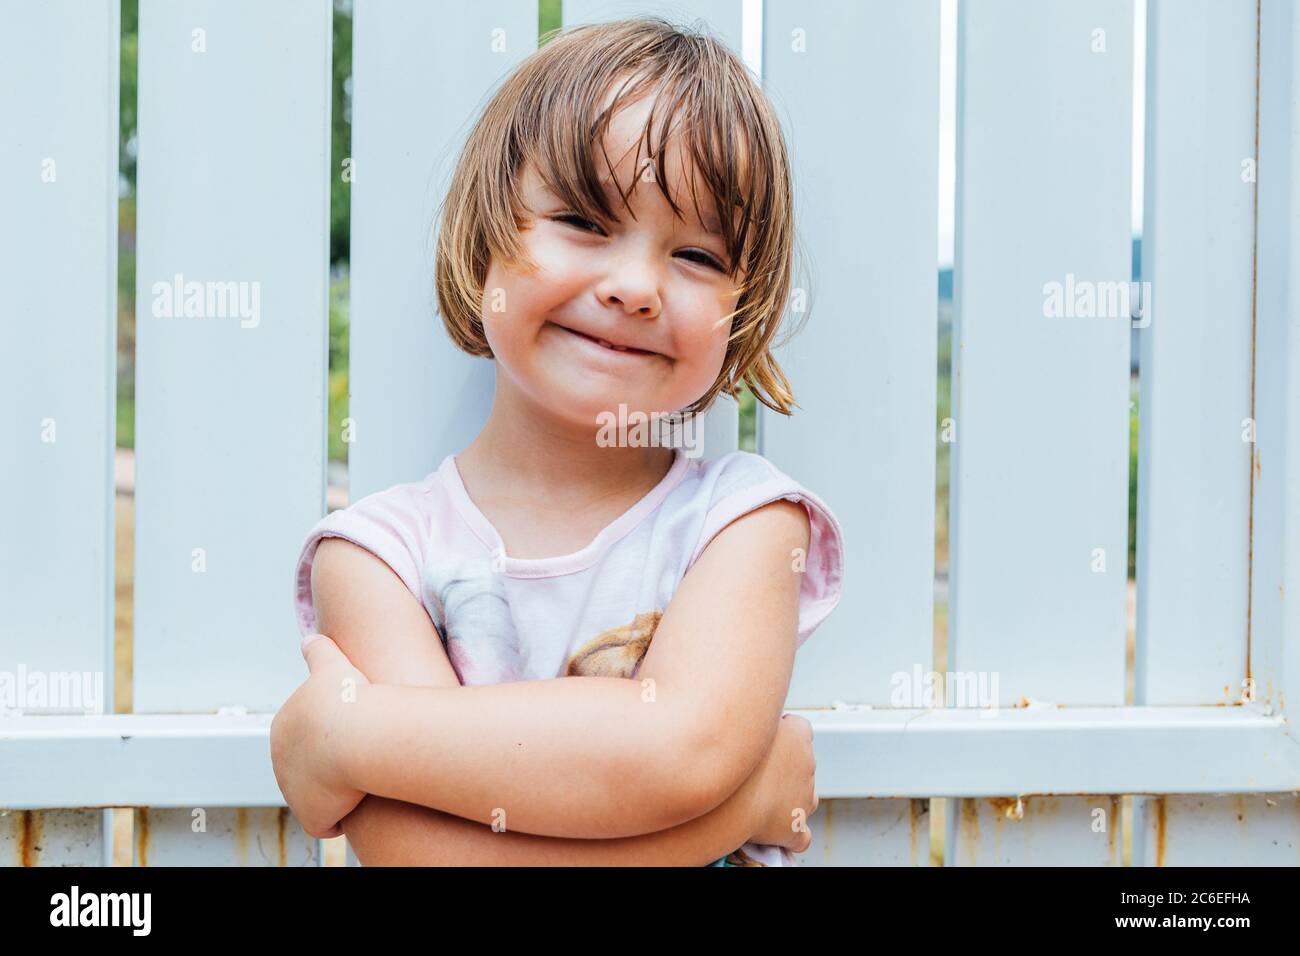 Portrait of blond-haired girl with arms crossed smiling Stock Photo